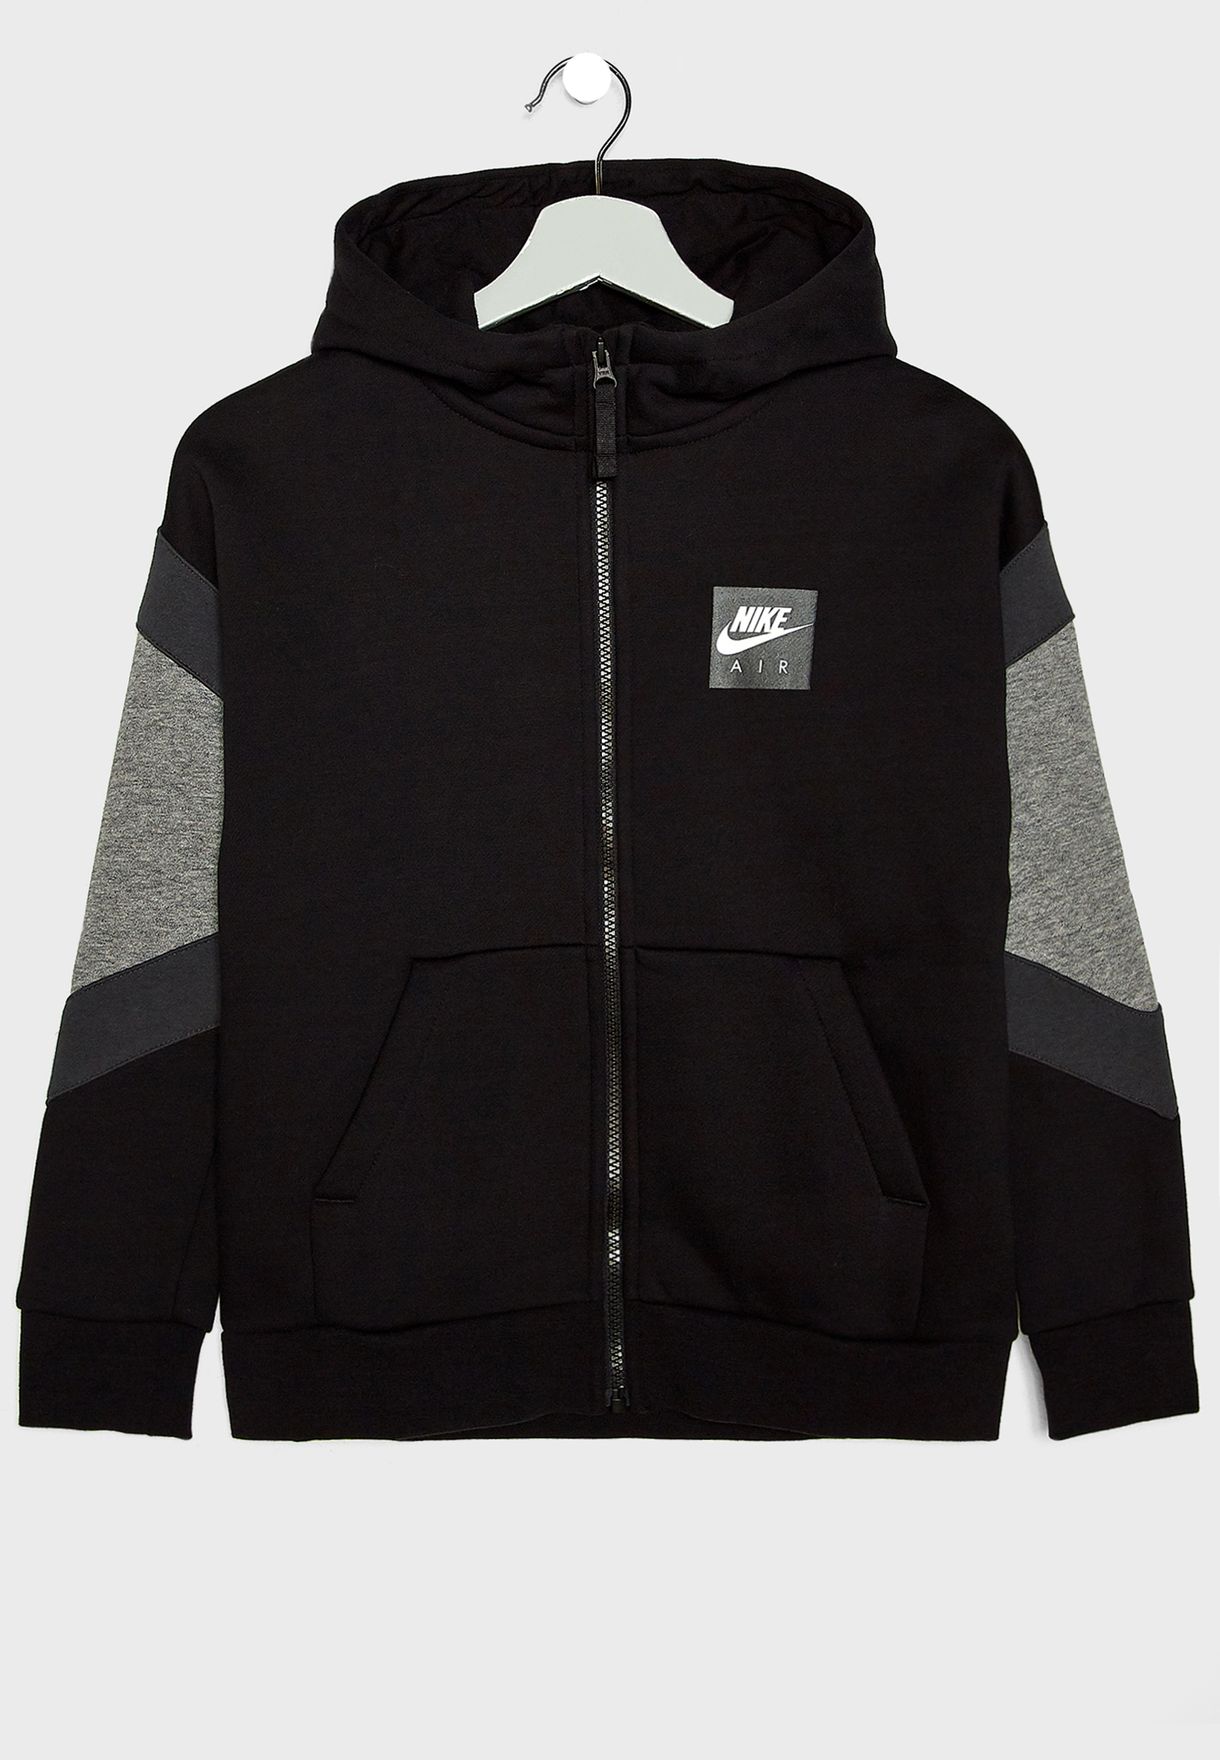 Consentimiento Molestia hospital Buy Nike black Youth Air Hoodie for Kids in MENA, Worldwide